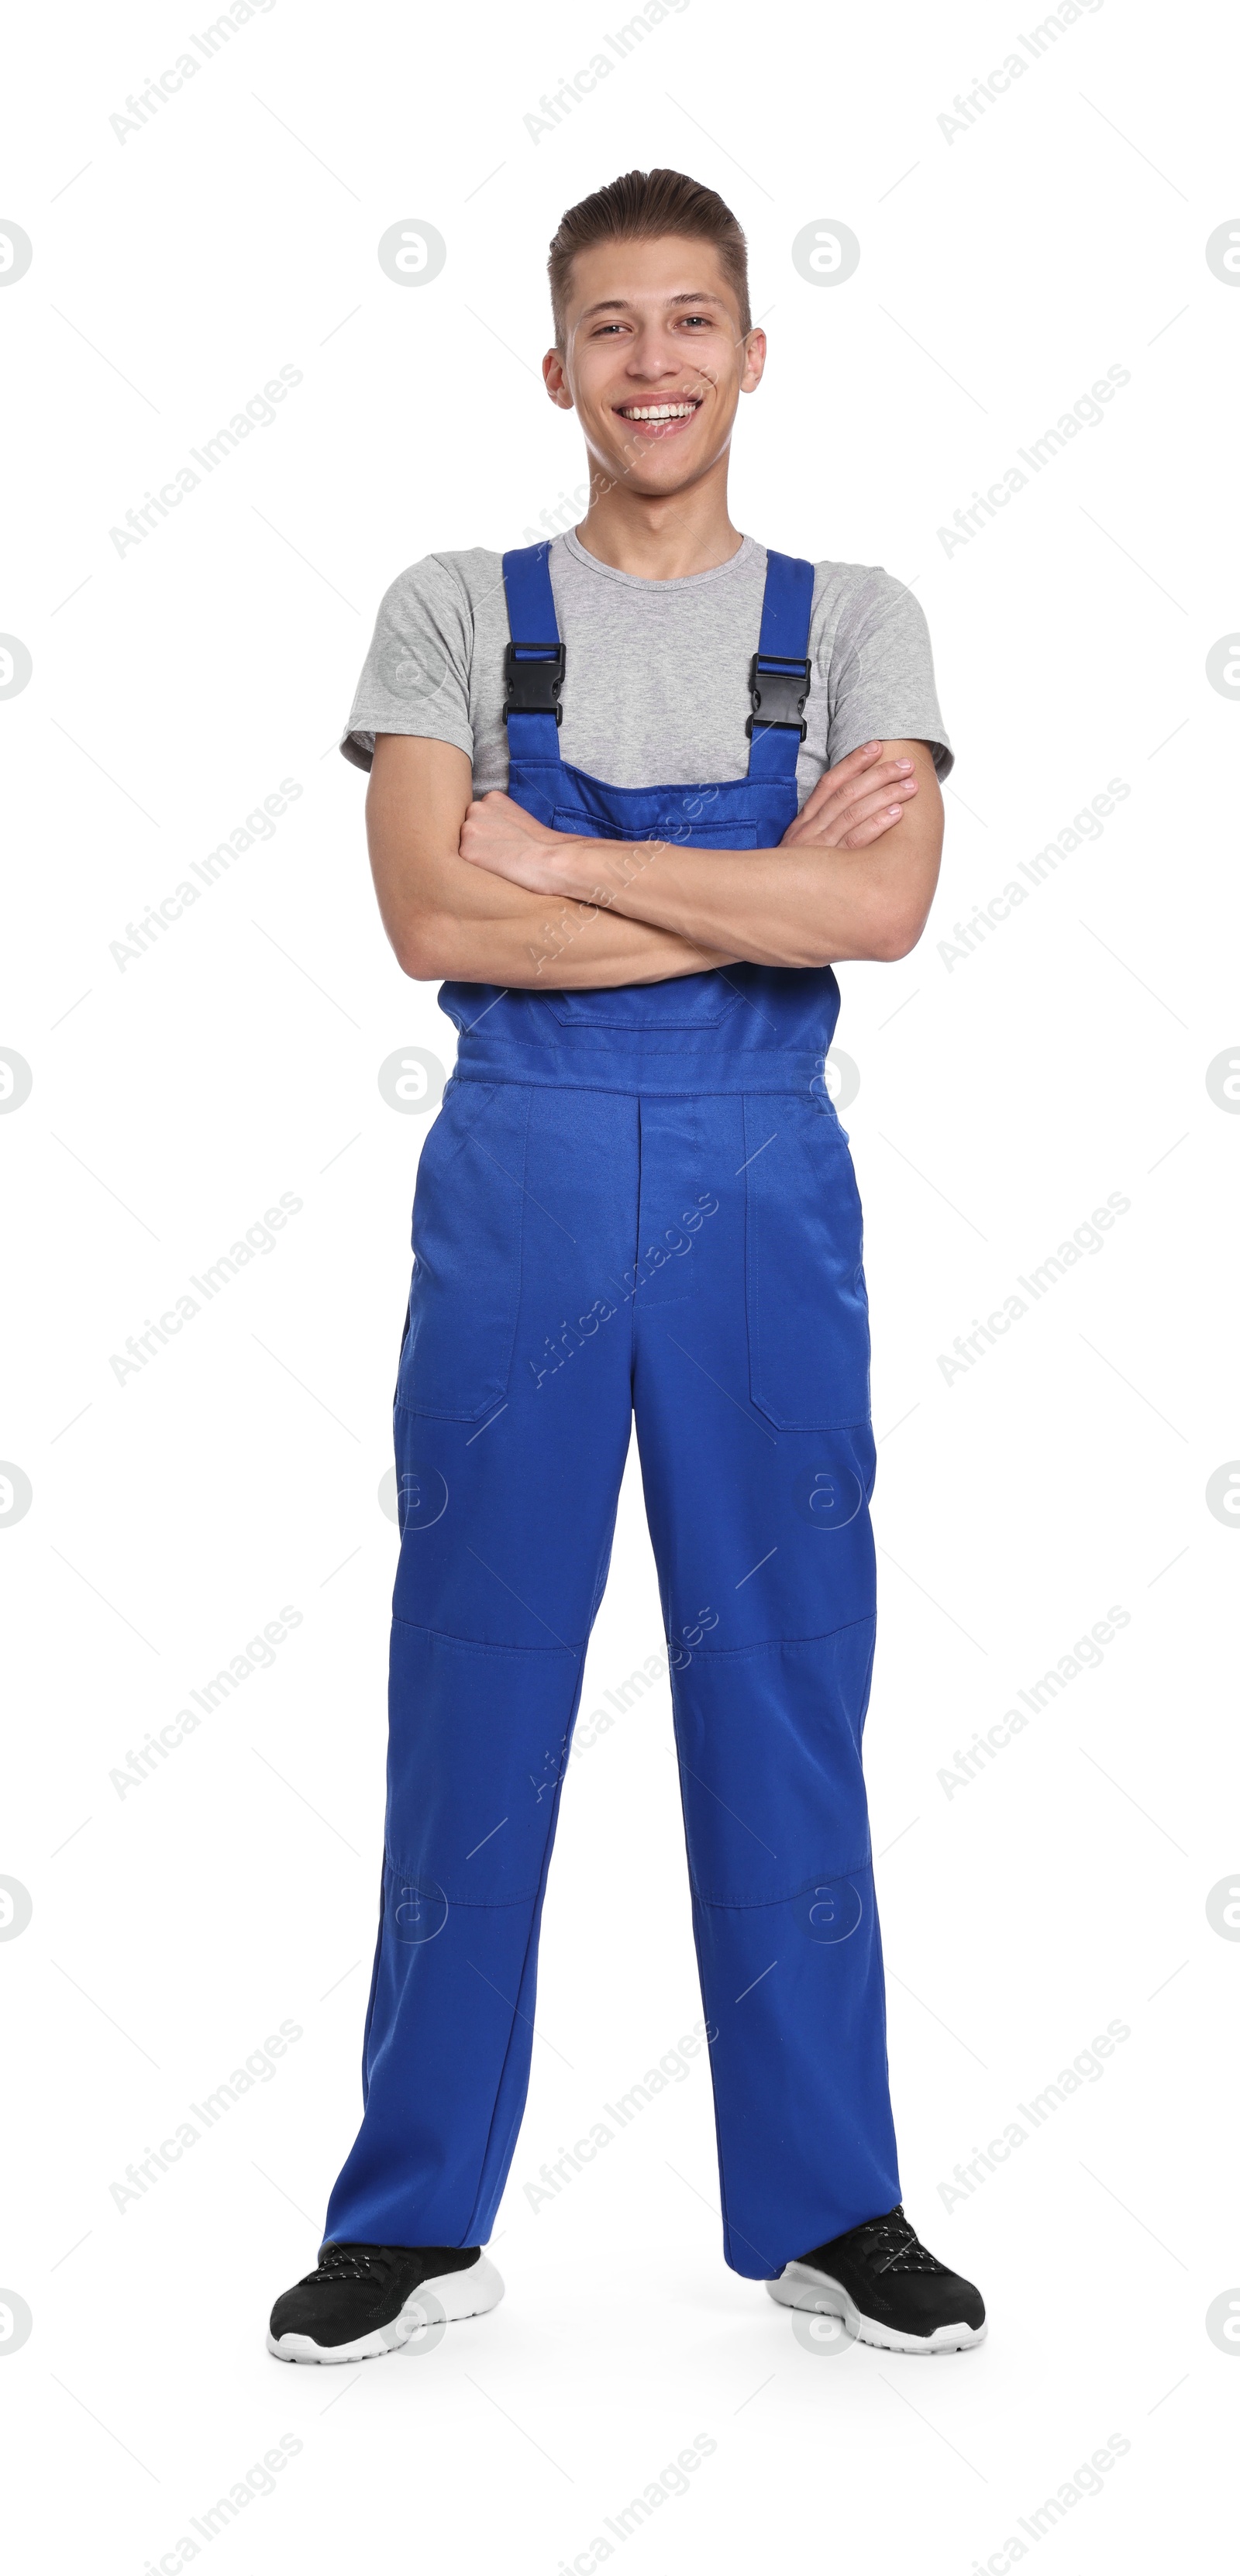 Photo of Smiling auto mechanic with crossed arms on white background